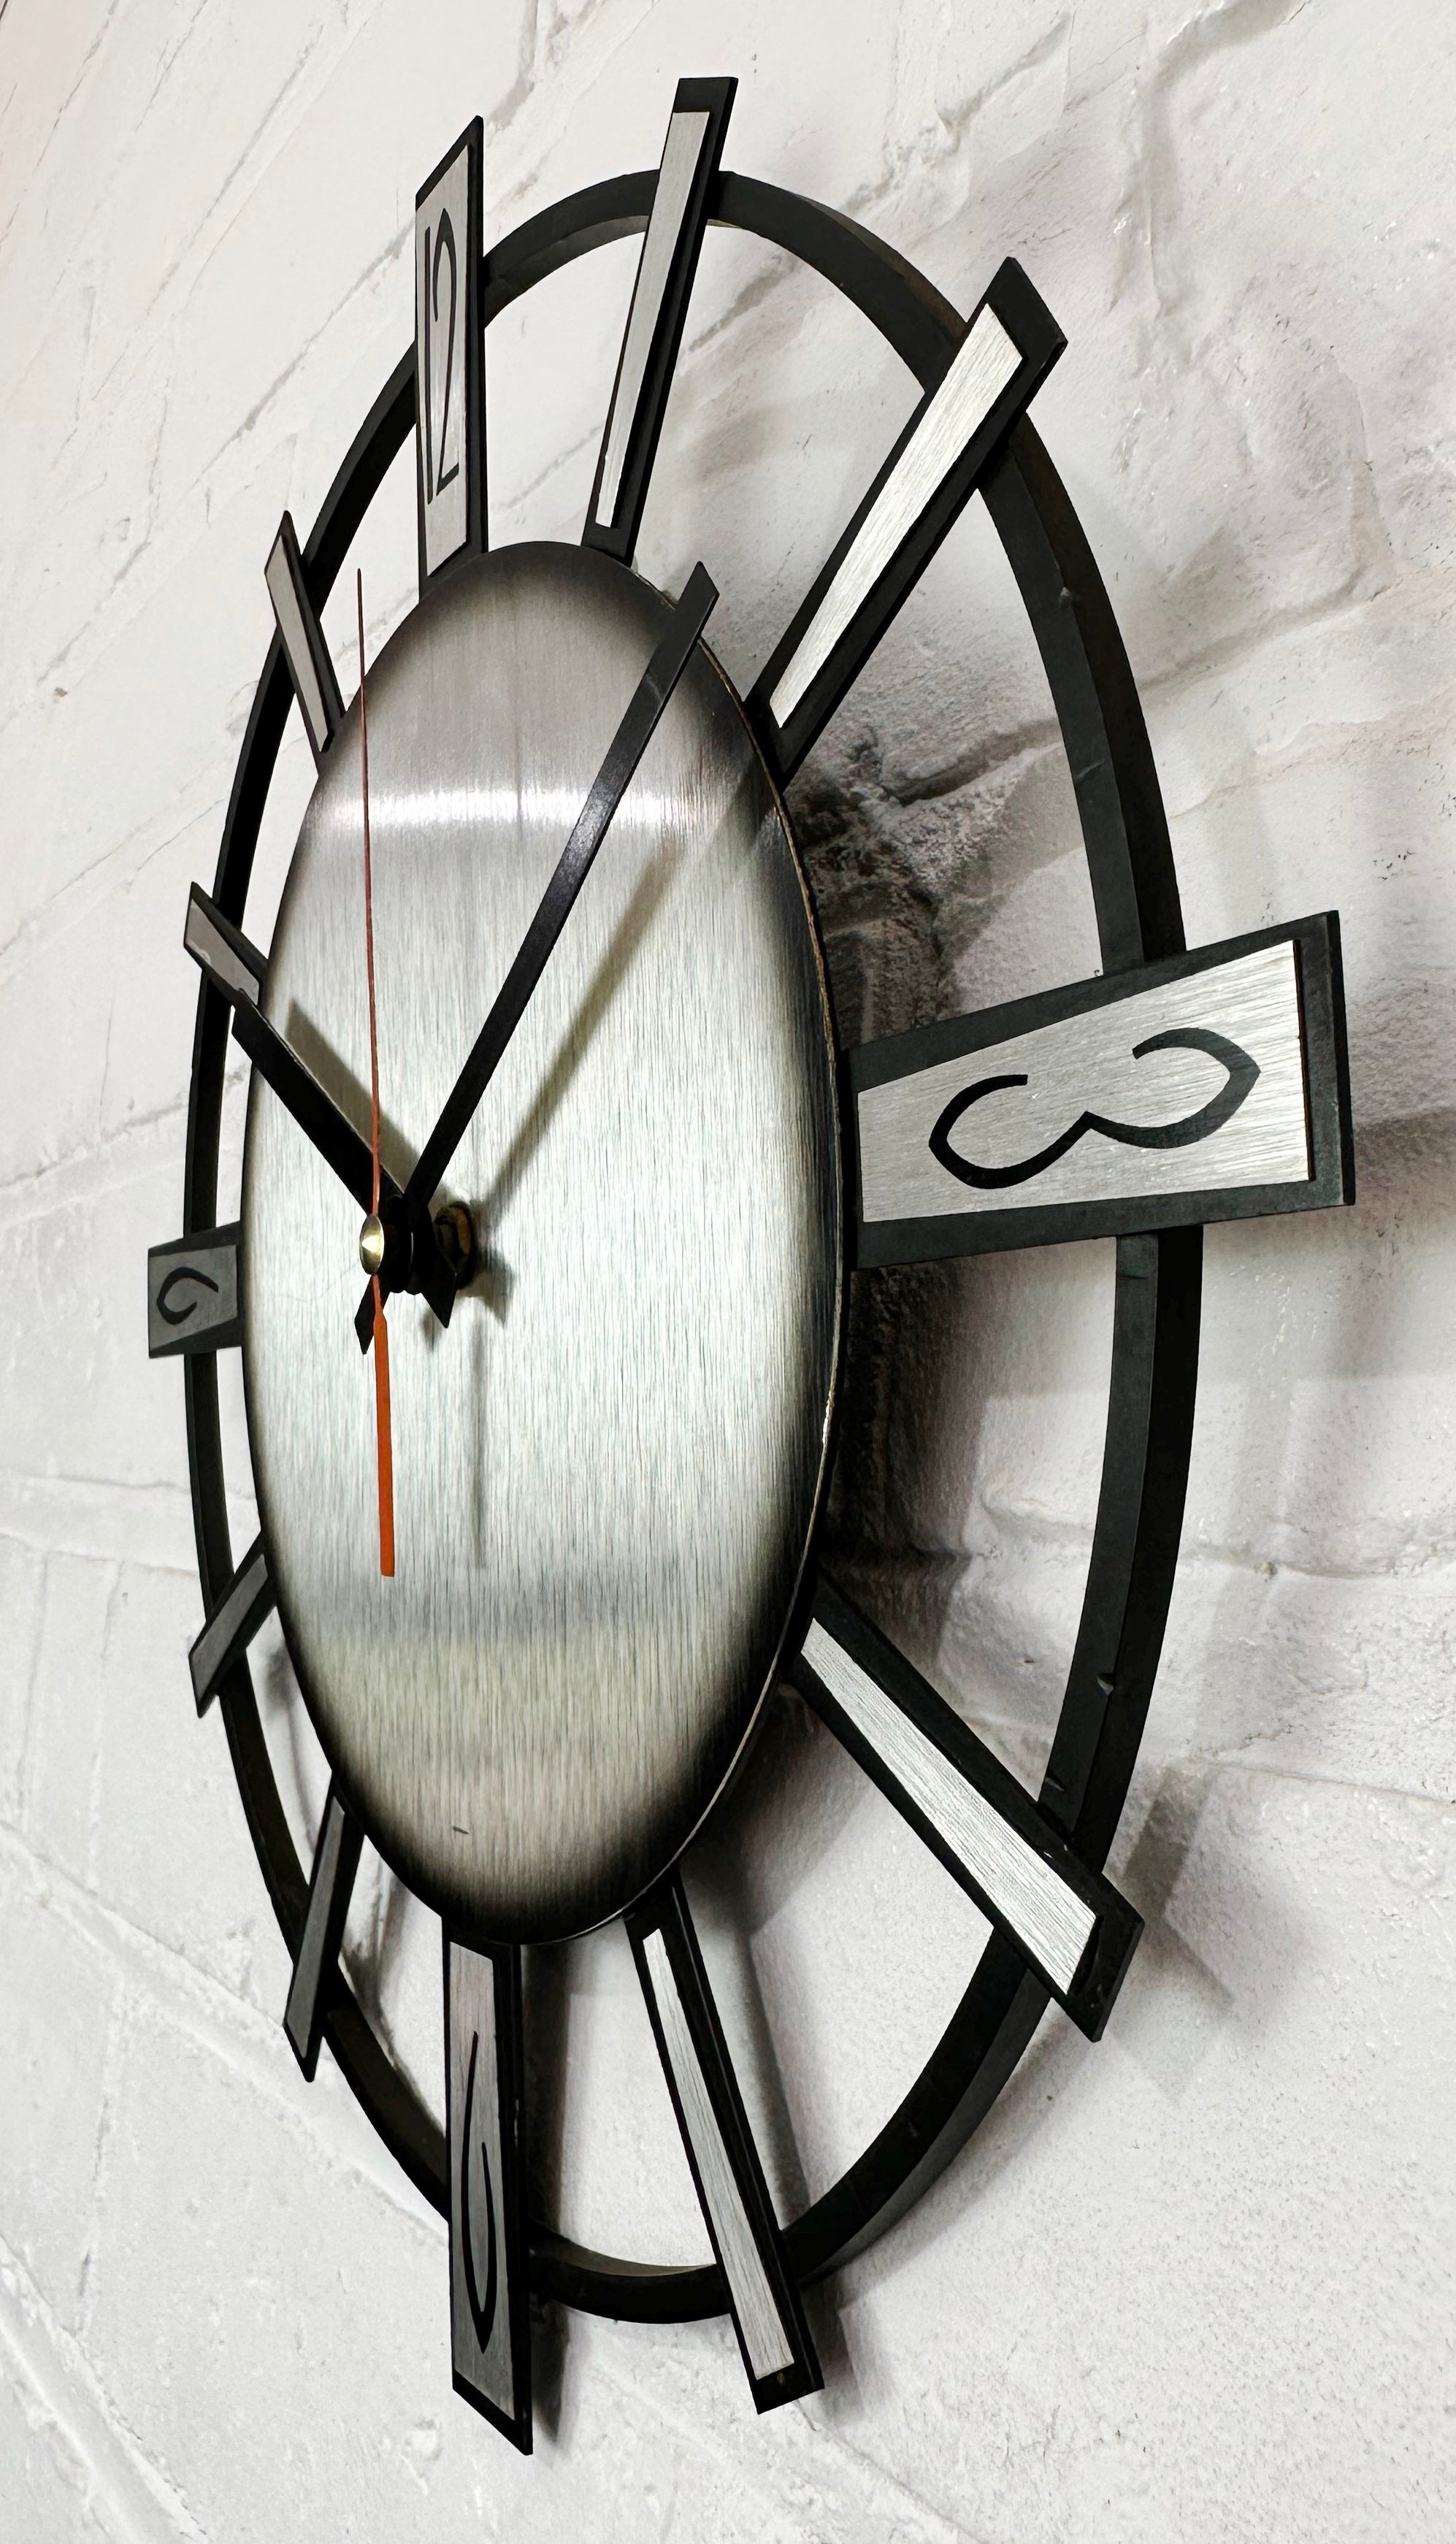 Vintage Starburst FOREIGN Battery Wall Clock | eXibit collection